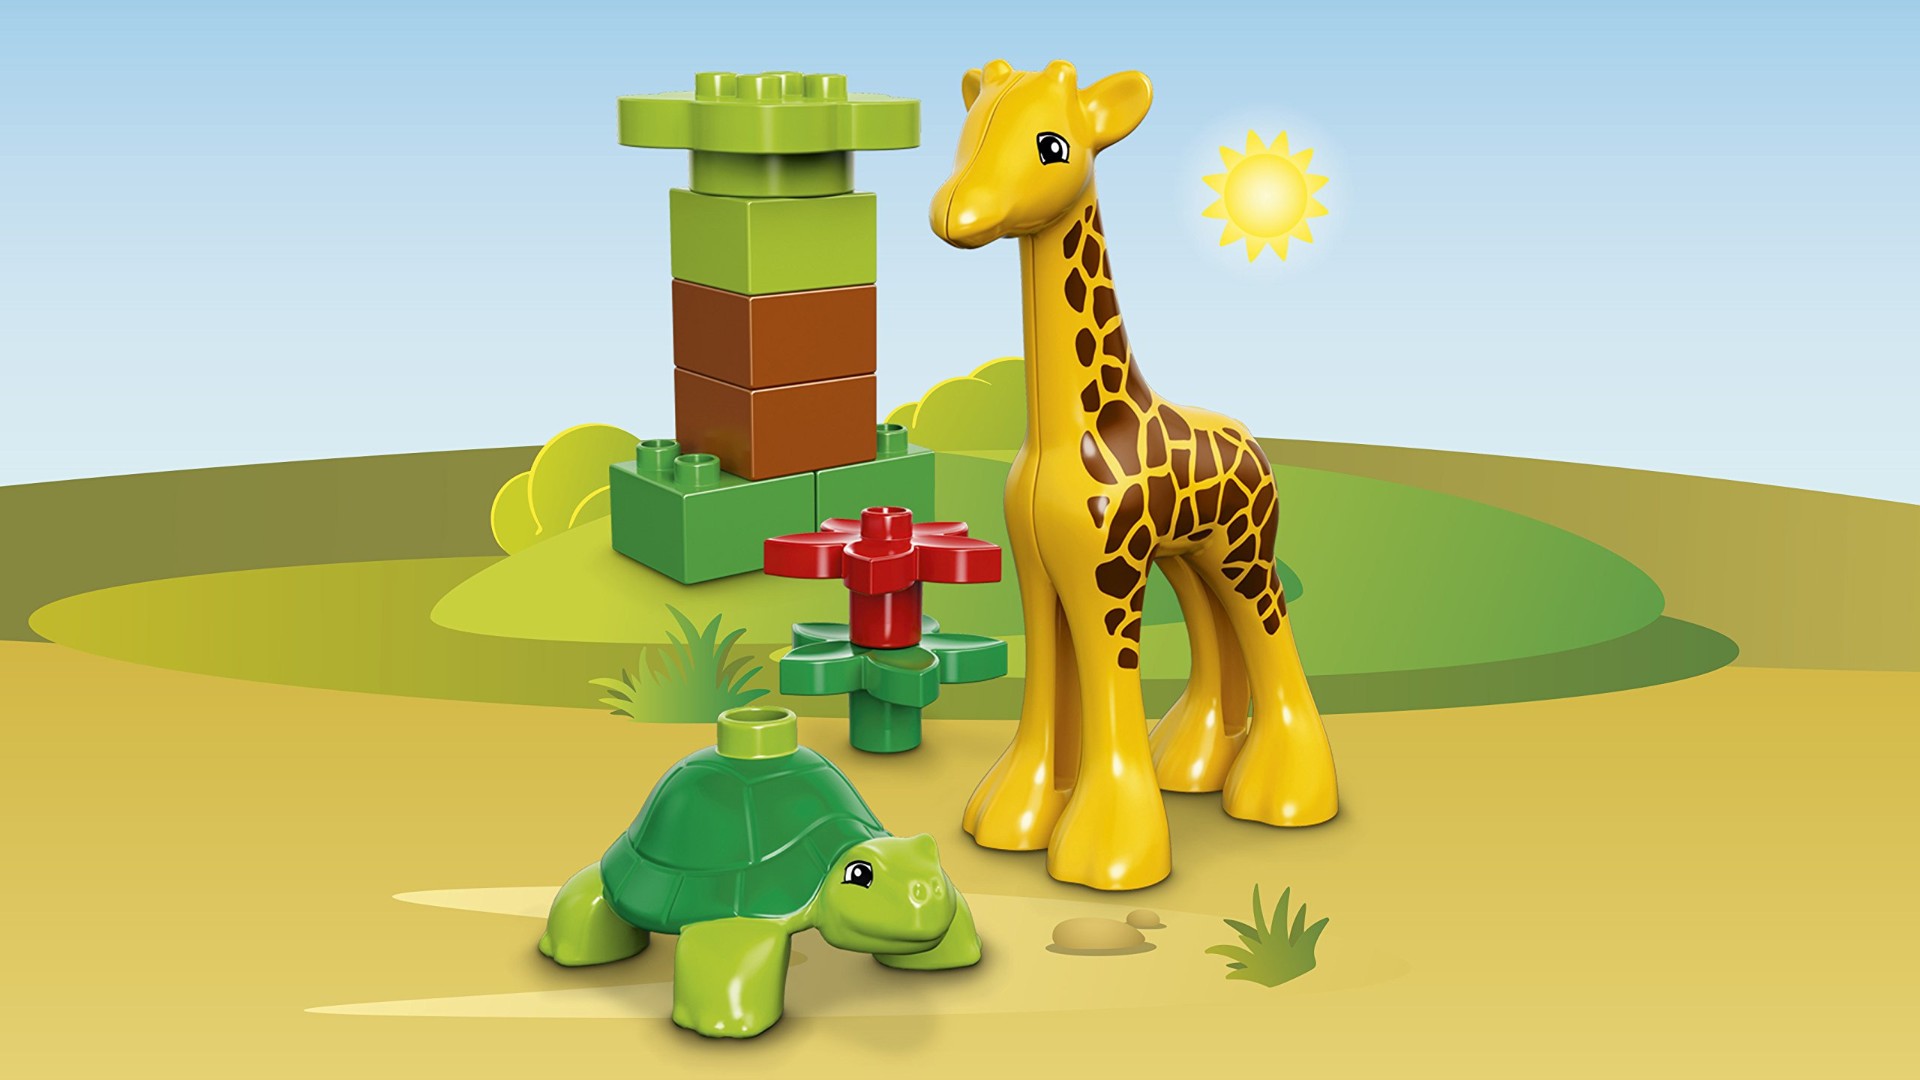 Lego Duplo World - Learn How to Get Stars